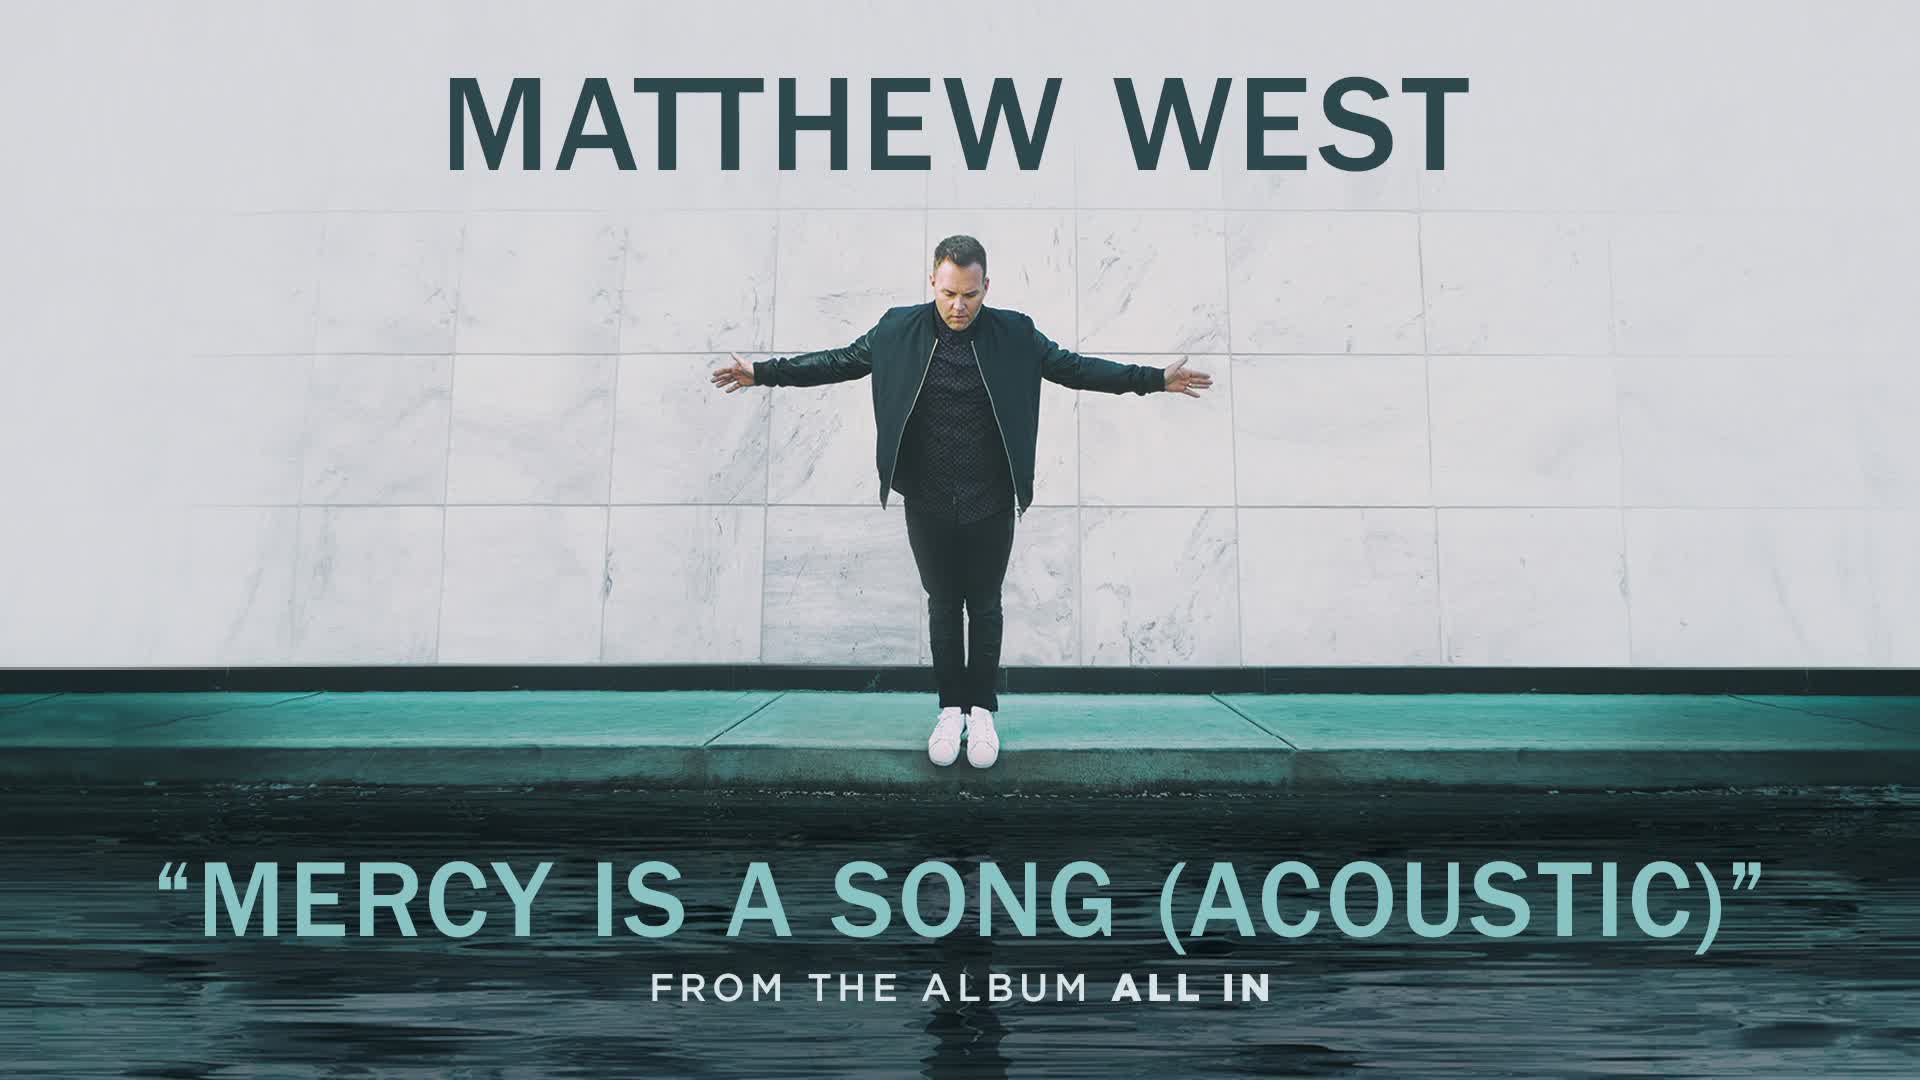 Mercy is a song matthew west